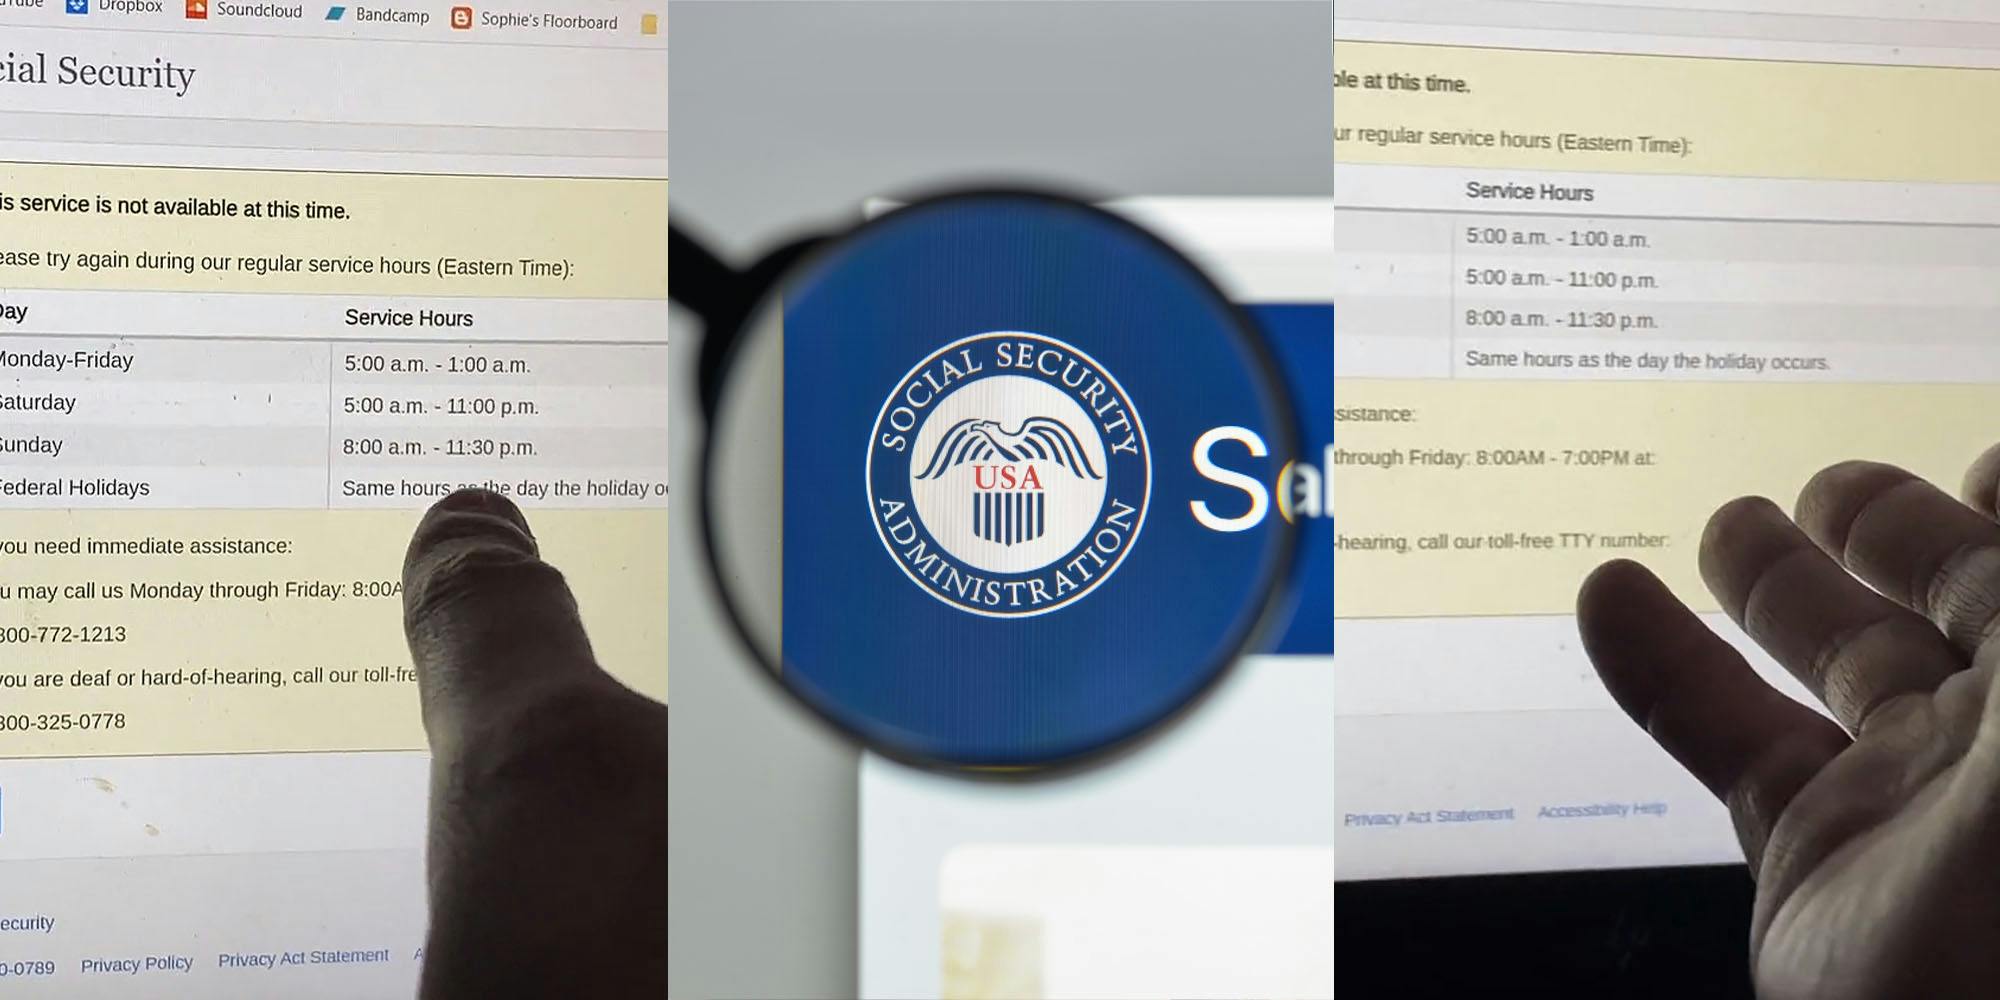 man pointing to computer screen at Social Security website displaying "Service Hours" (l) Social Security Administration logo in magnifying glass lens (c) man hand out towards computer screen displaying "Service Hours" (r)